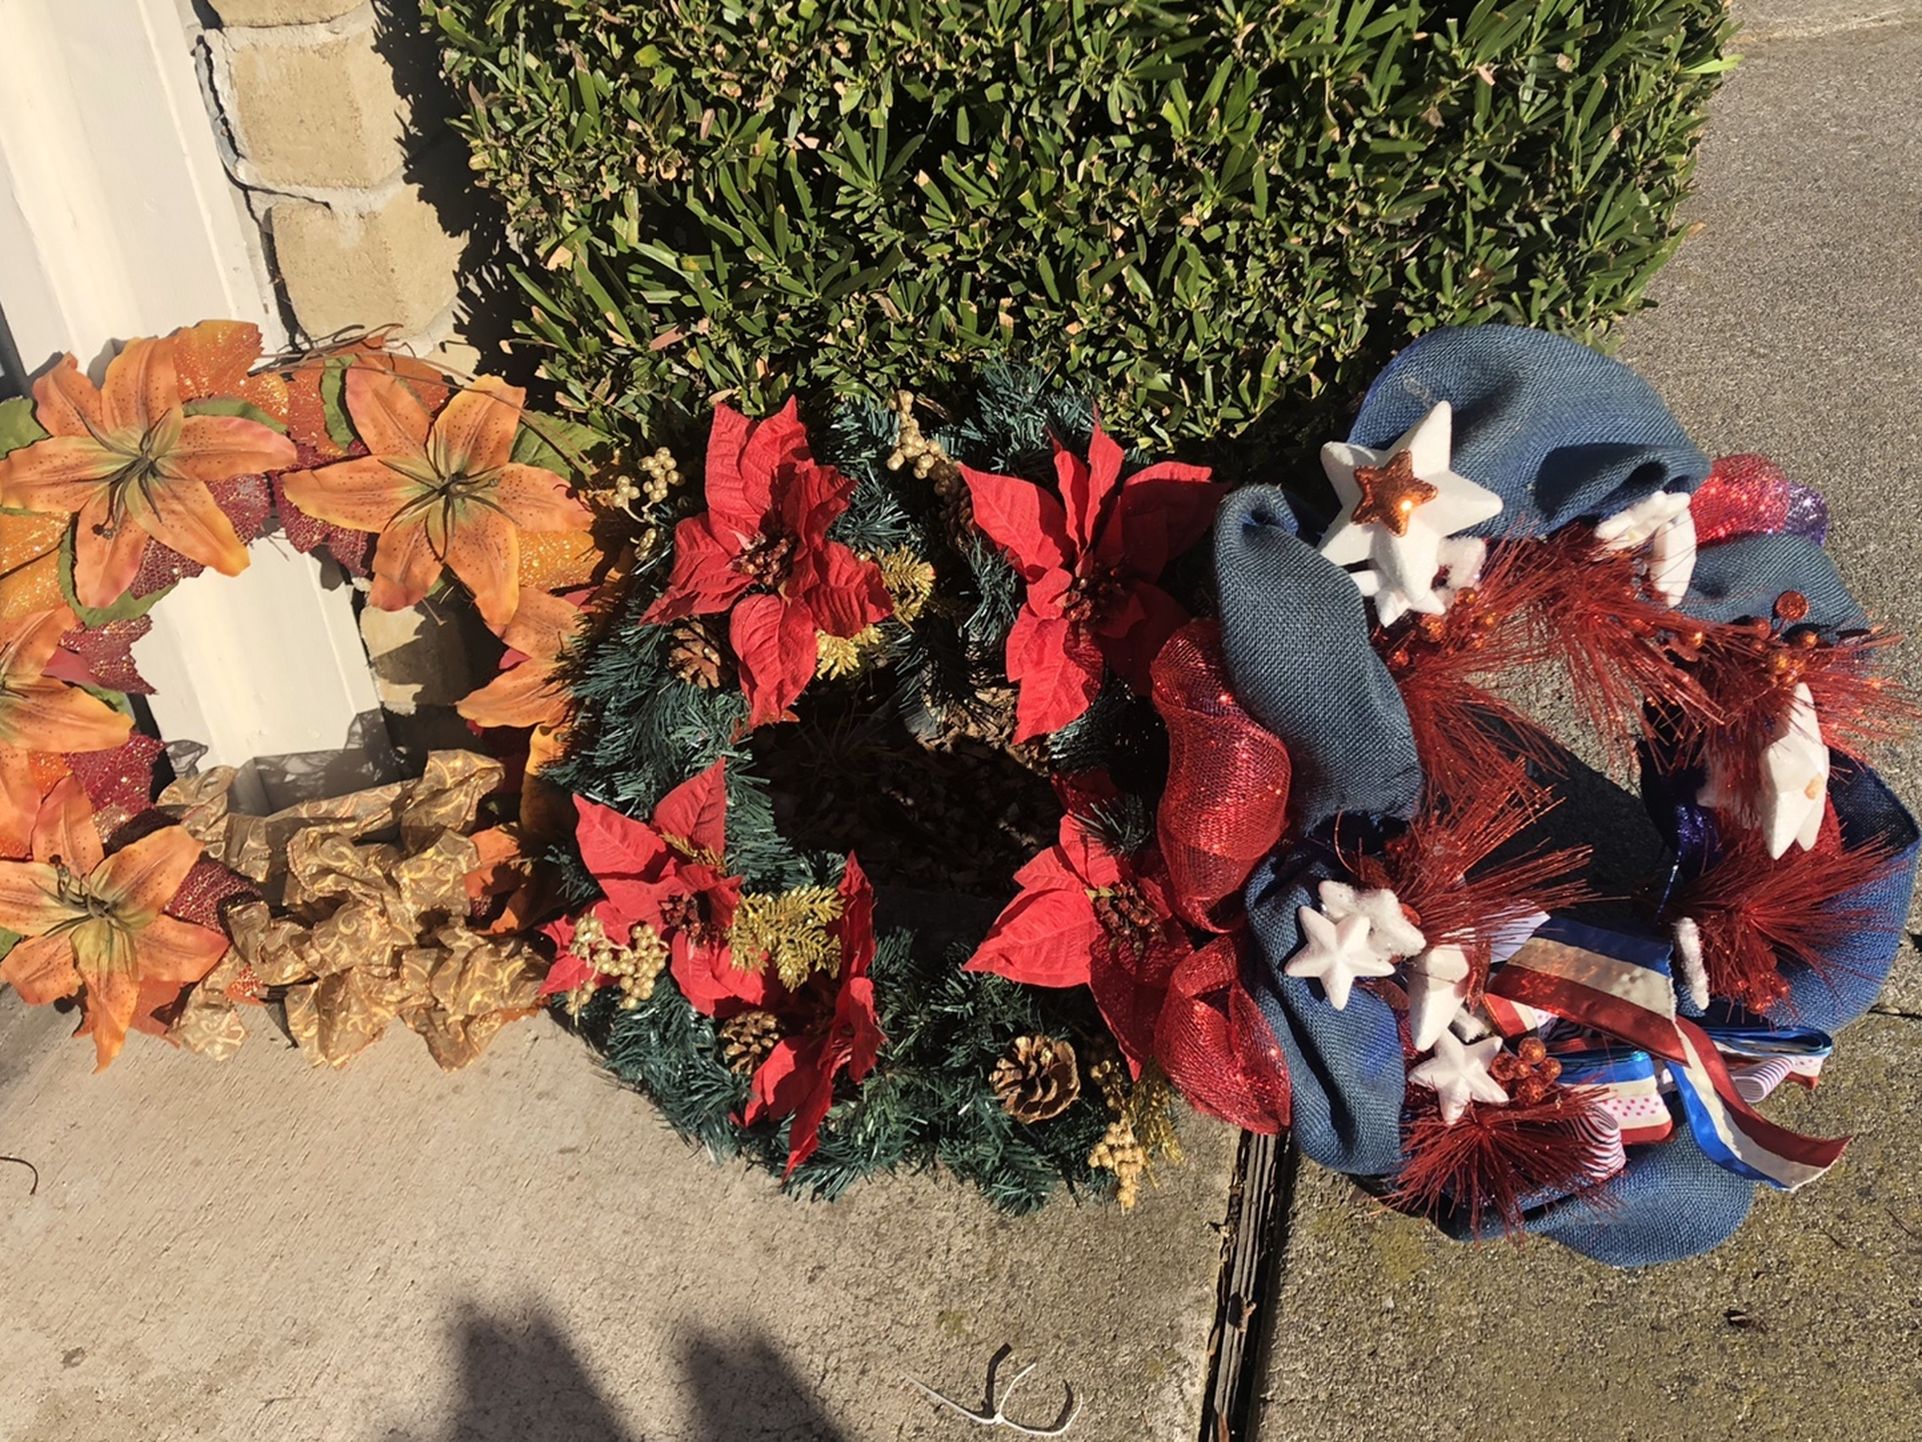 Holiday Wreaths - $10 For All 3